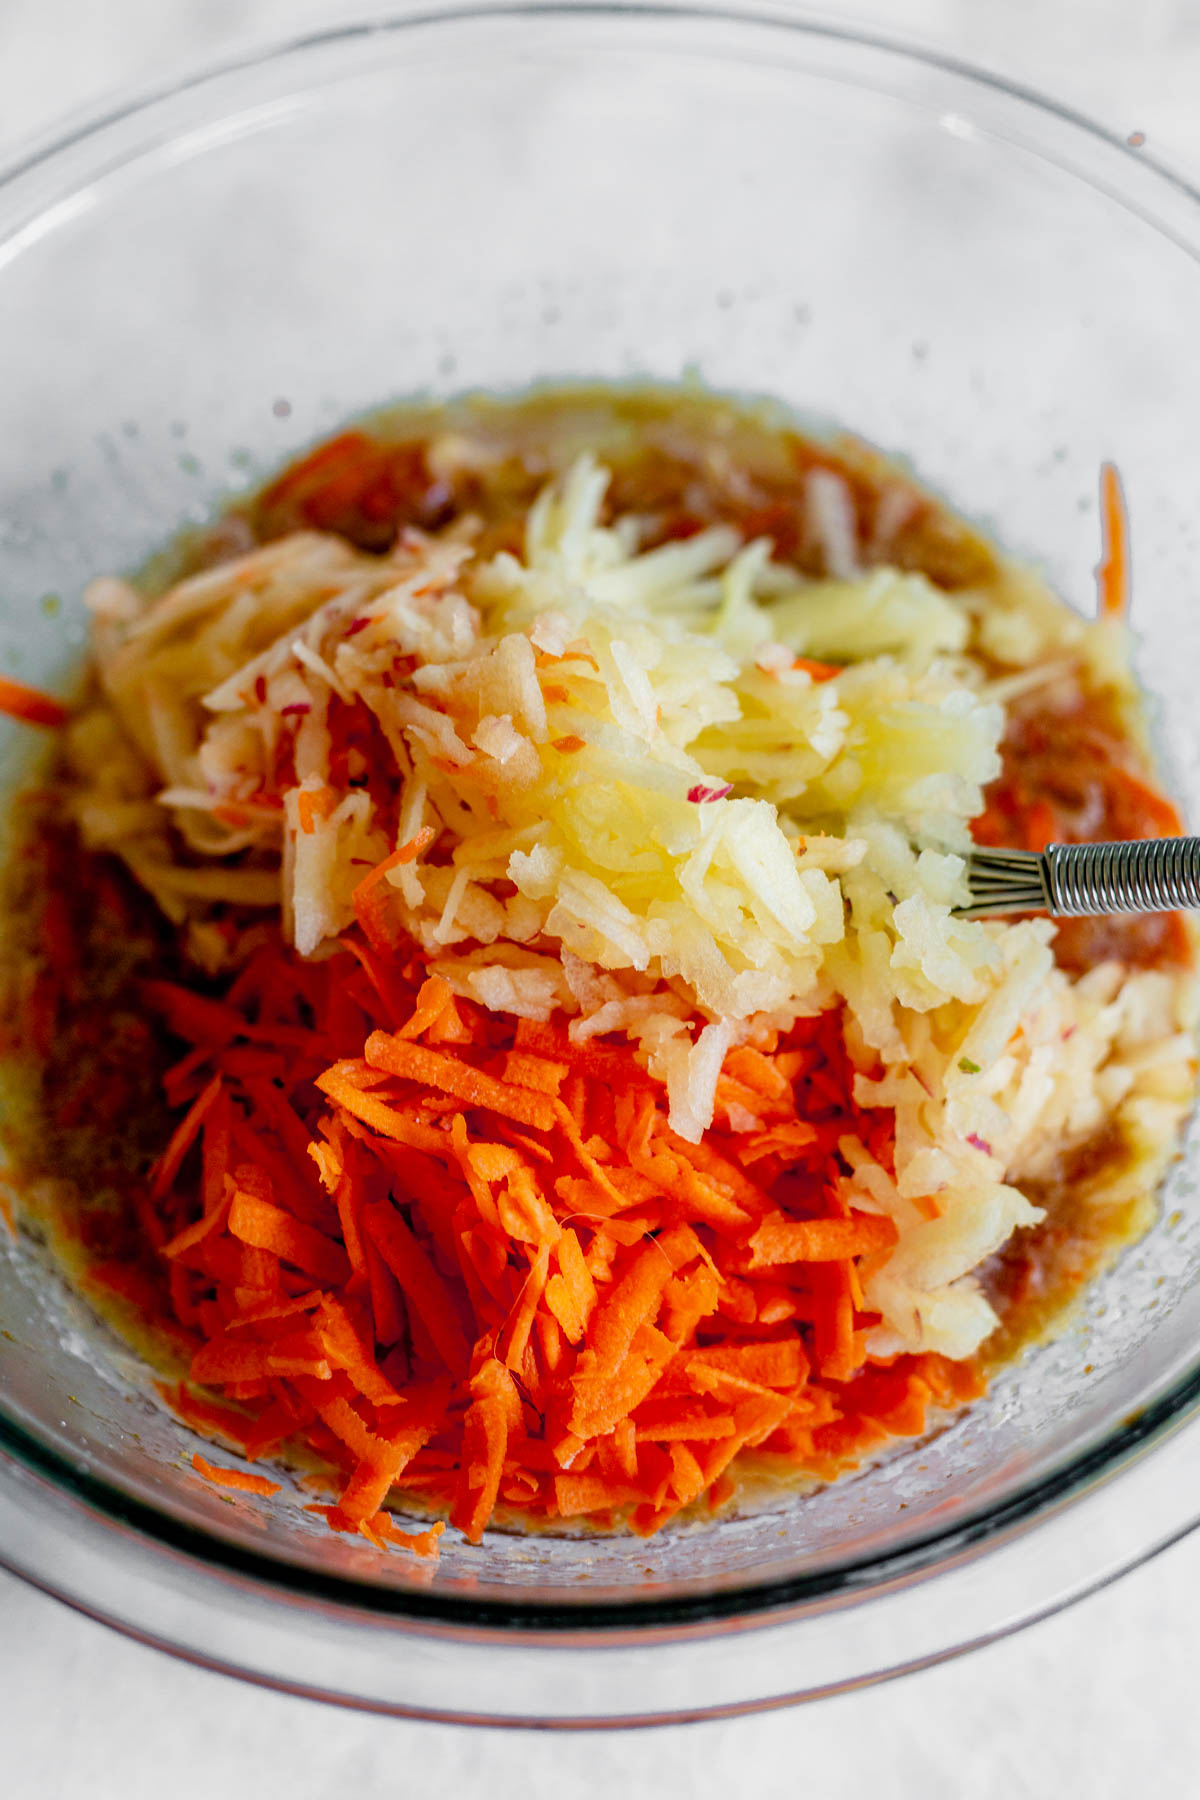 shredded apples, carrots and other wet ingredients for gluten free morning glory muffins